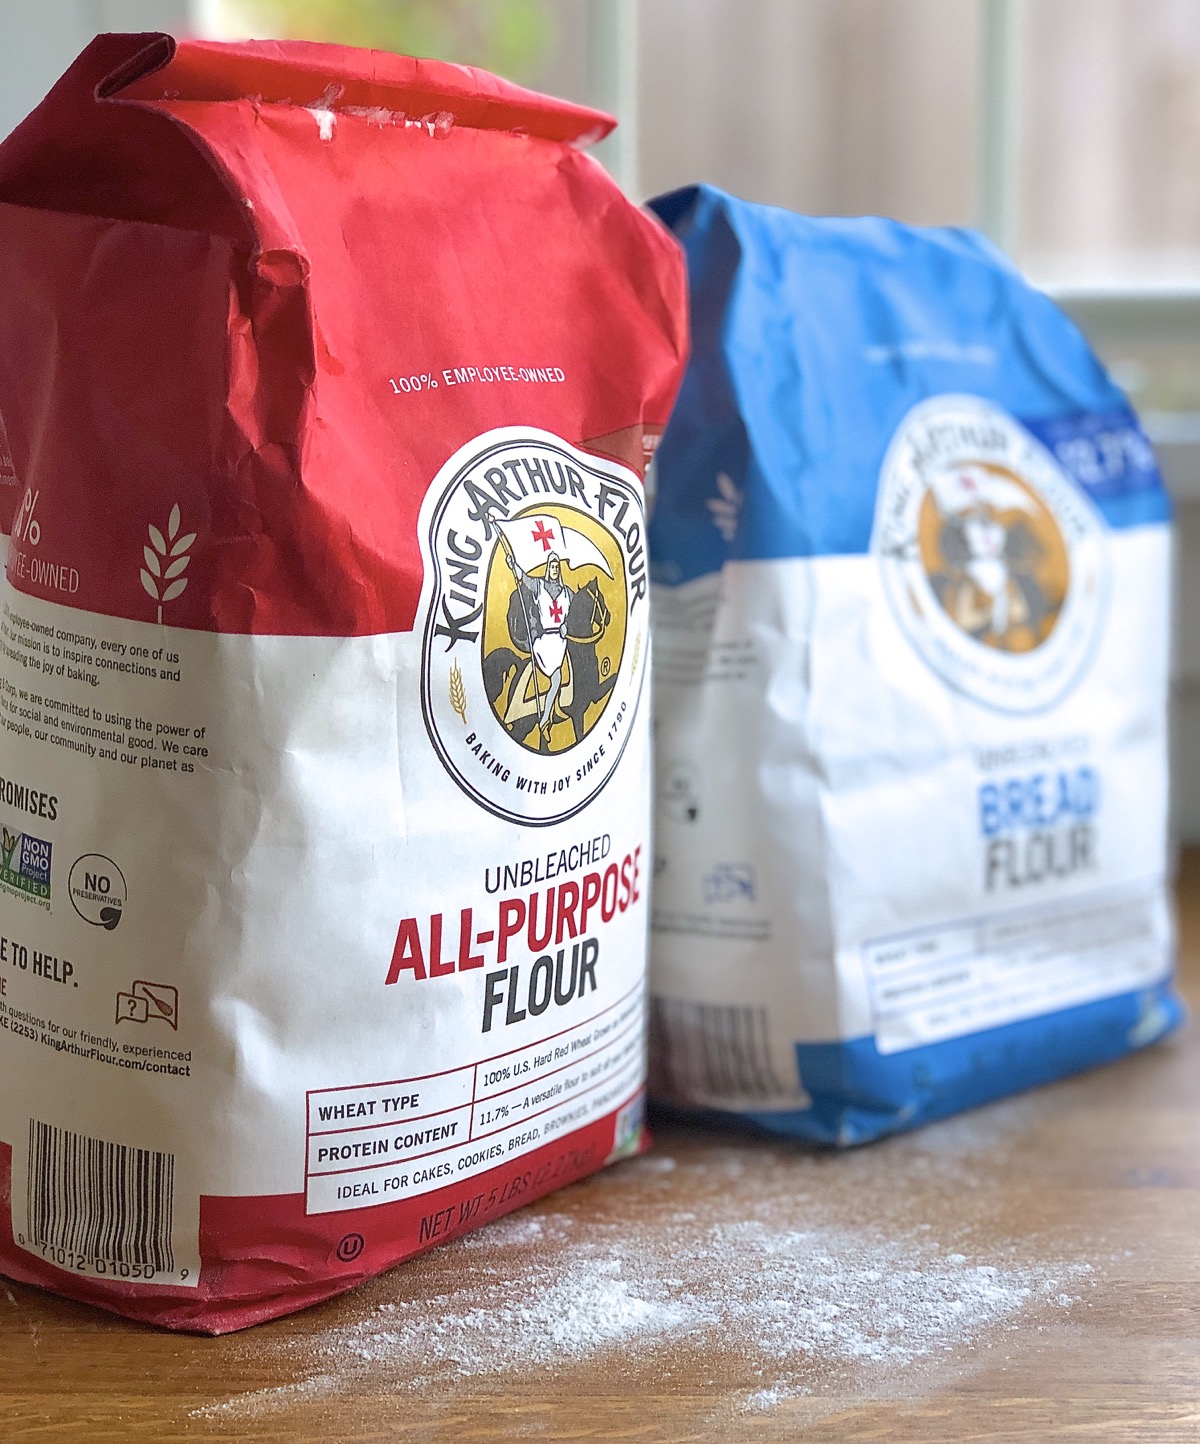 Bags of King Arthur all-purpose flour and bread flour on a table.